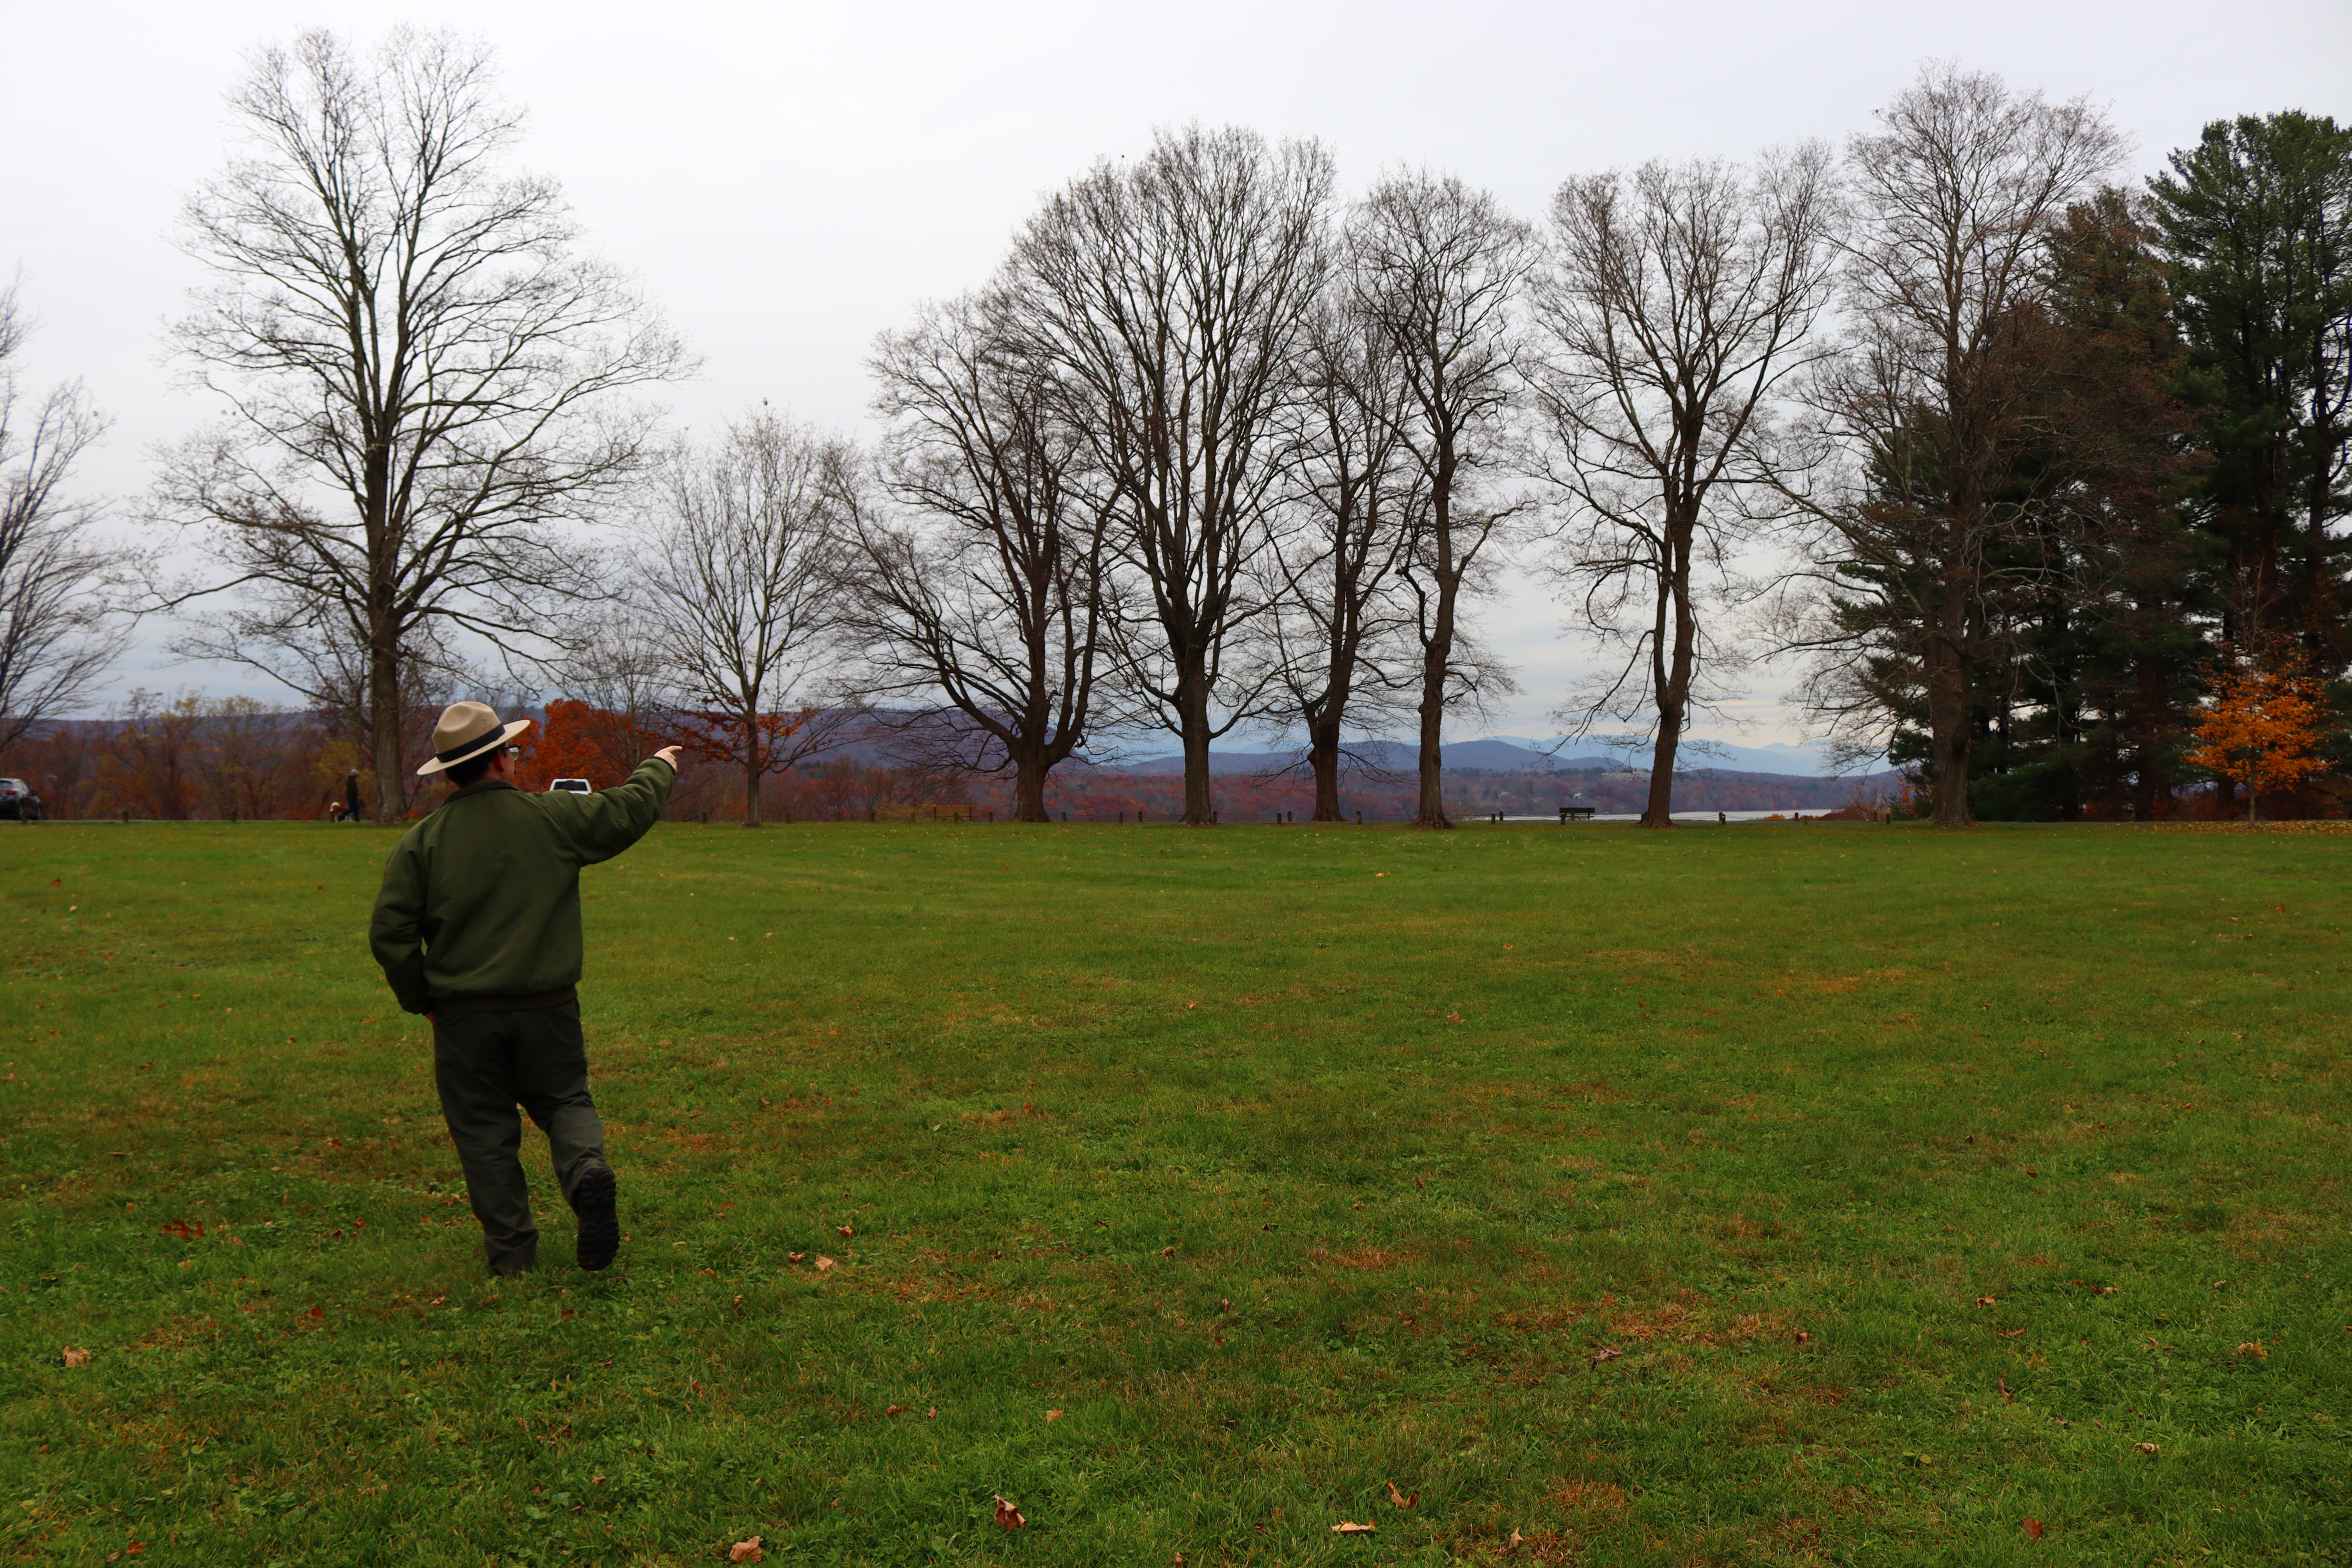 A male park ranger points to his right as he walks across a grassy field. Mountains and a river are visible in the background.